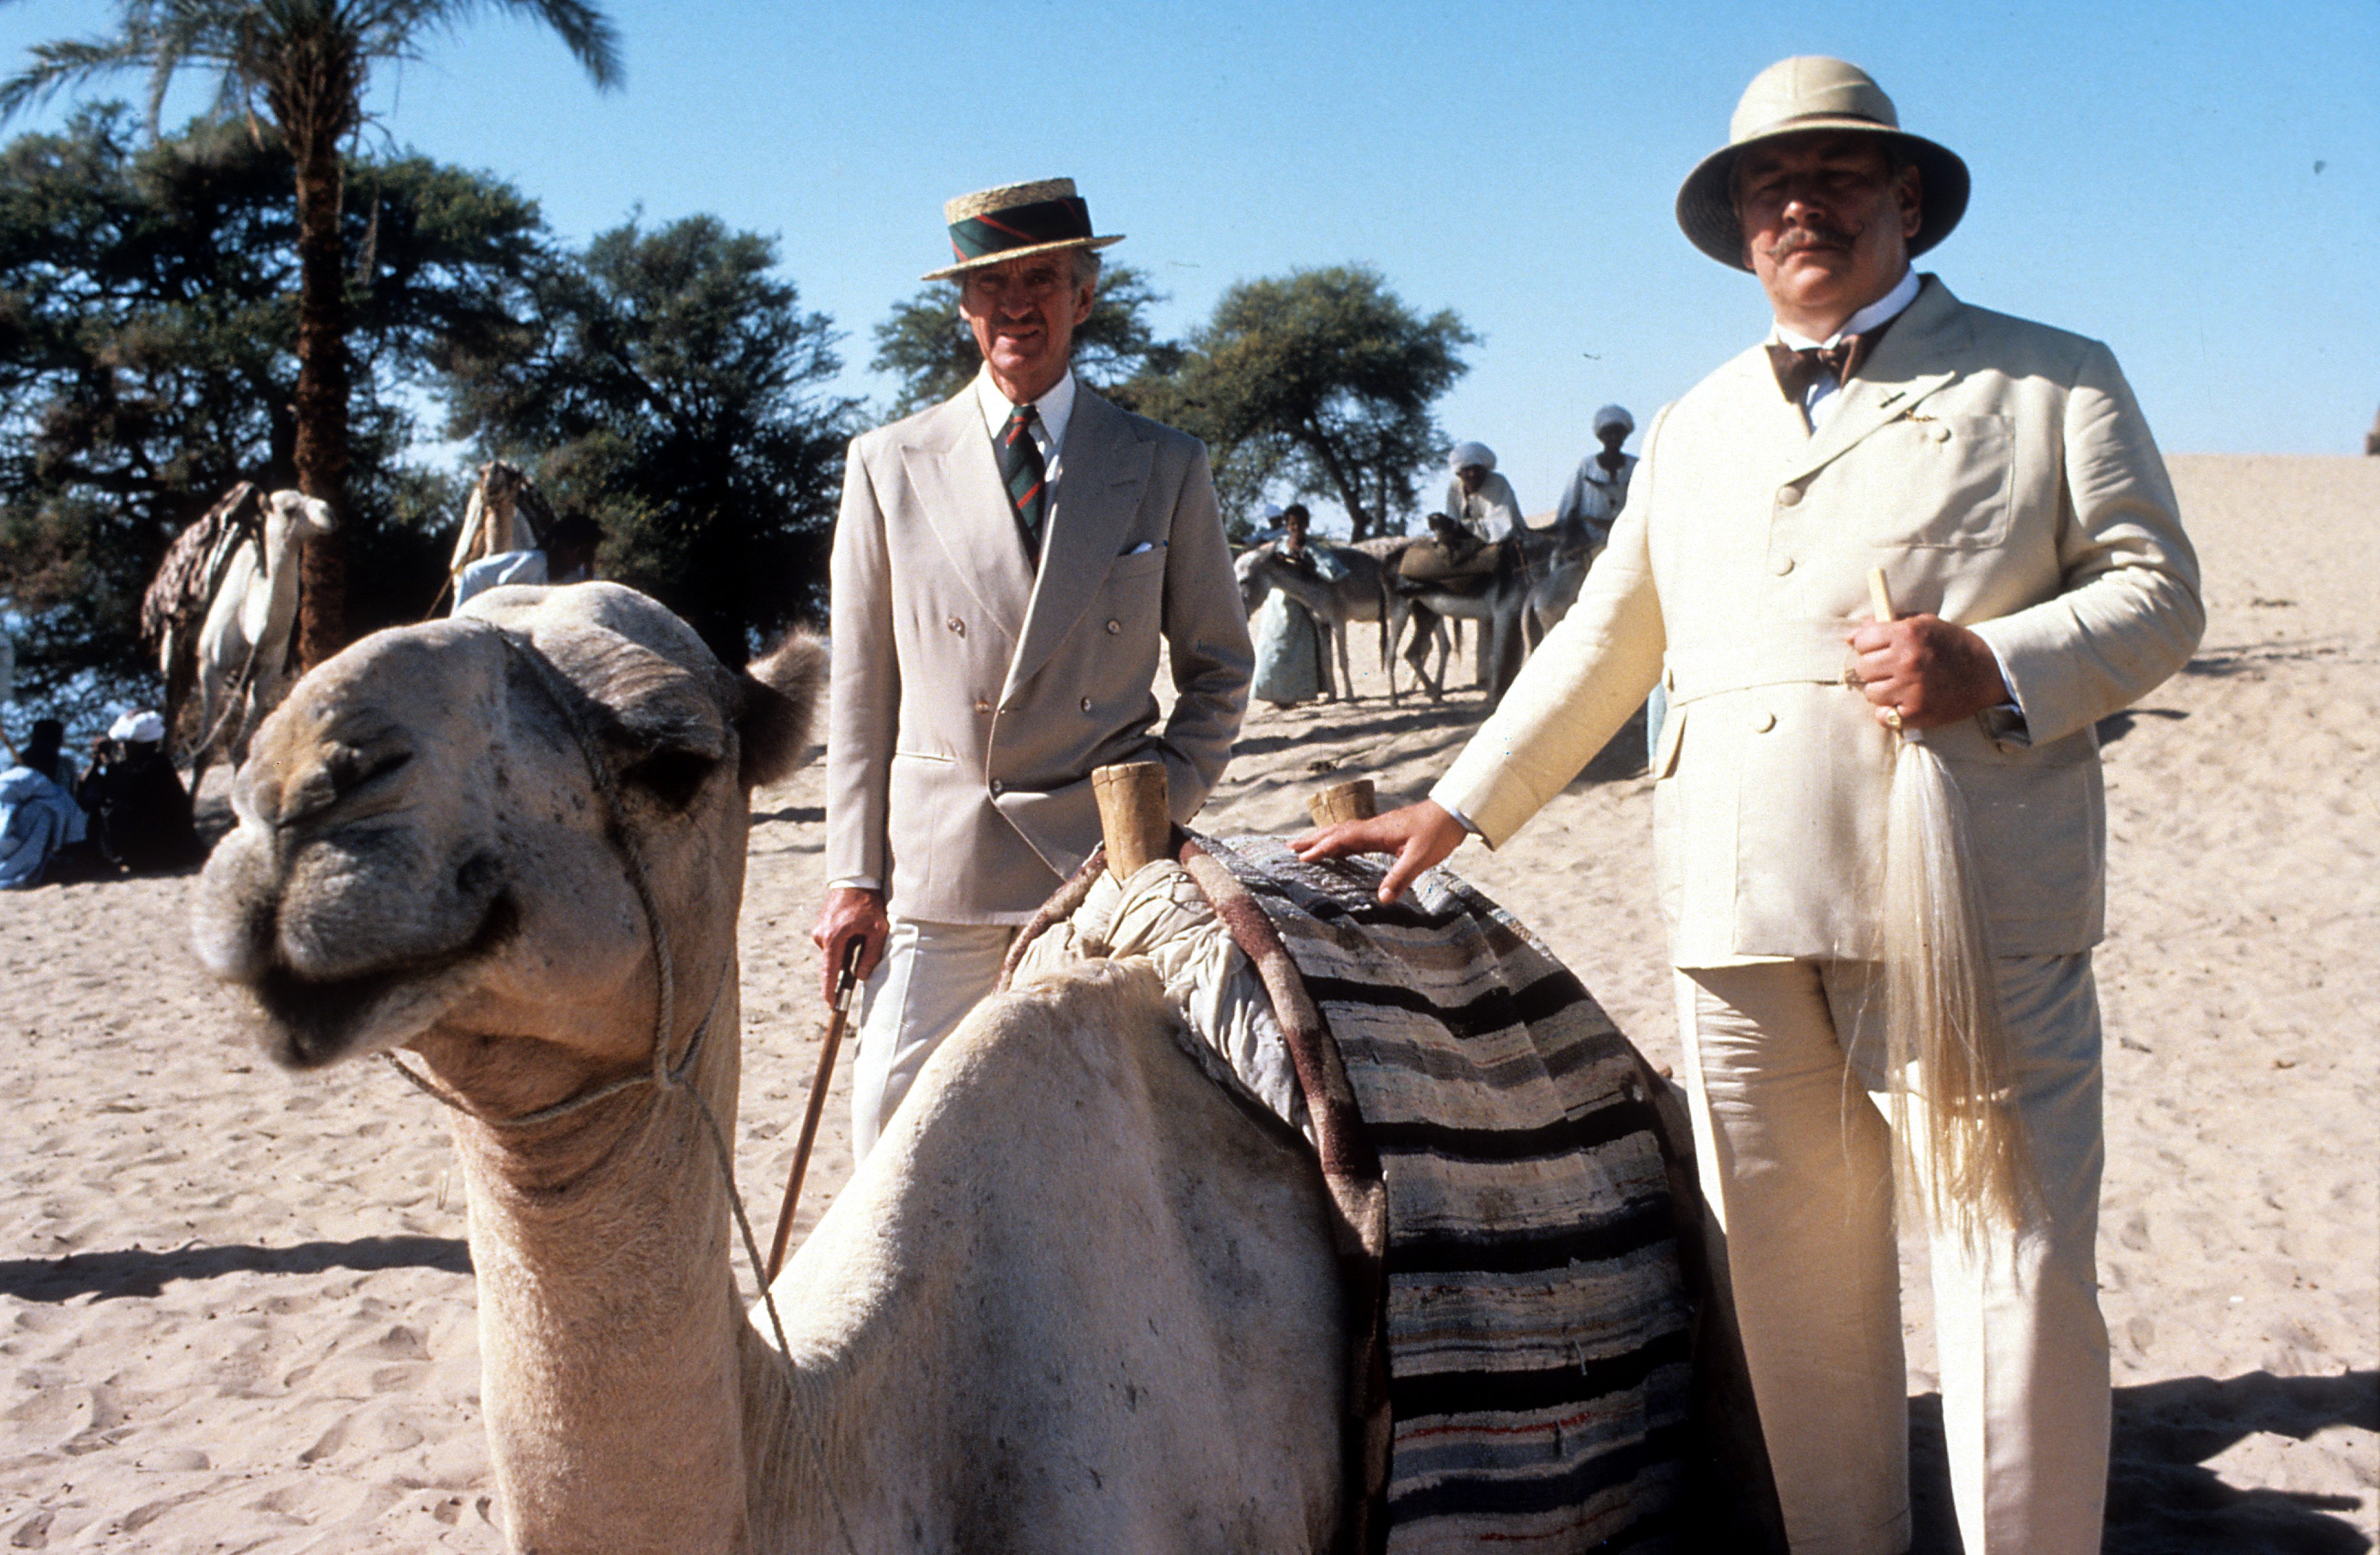 Peter Ustinov dressed in a suit and hat touching a camel, next to David Niven, in a scene from the film 'Death On The Nile', 1978